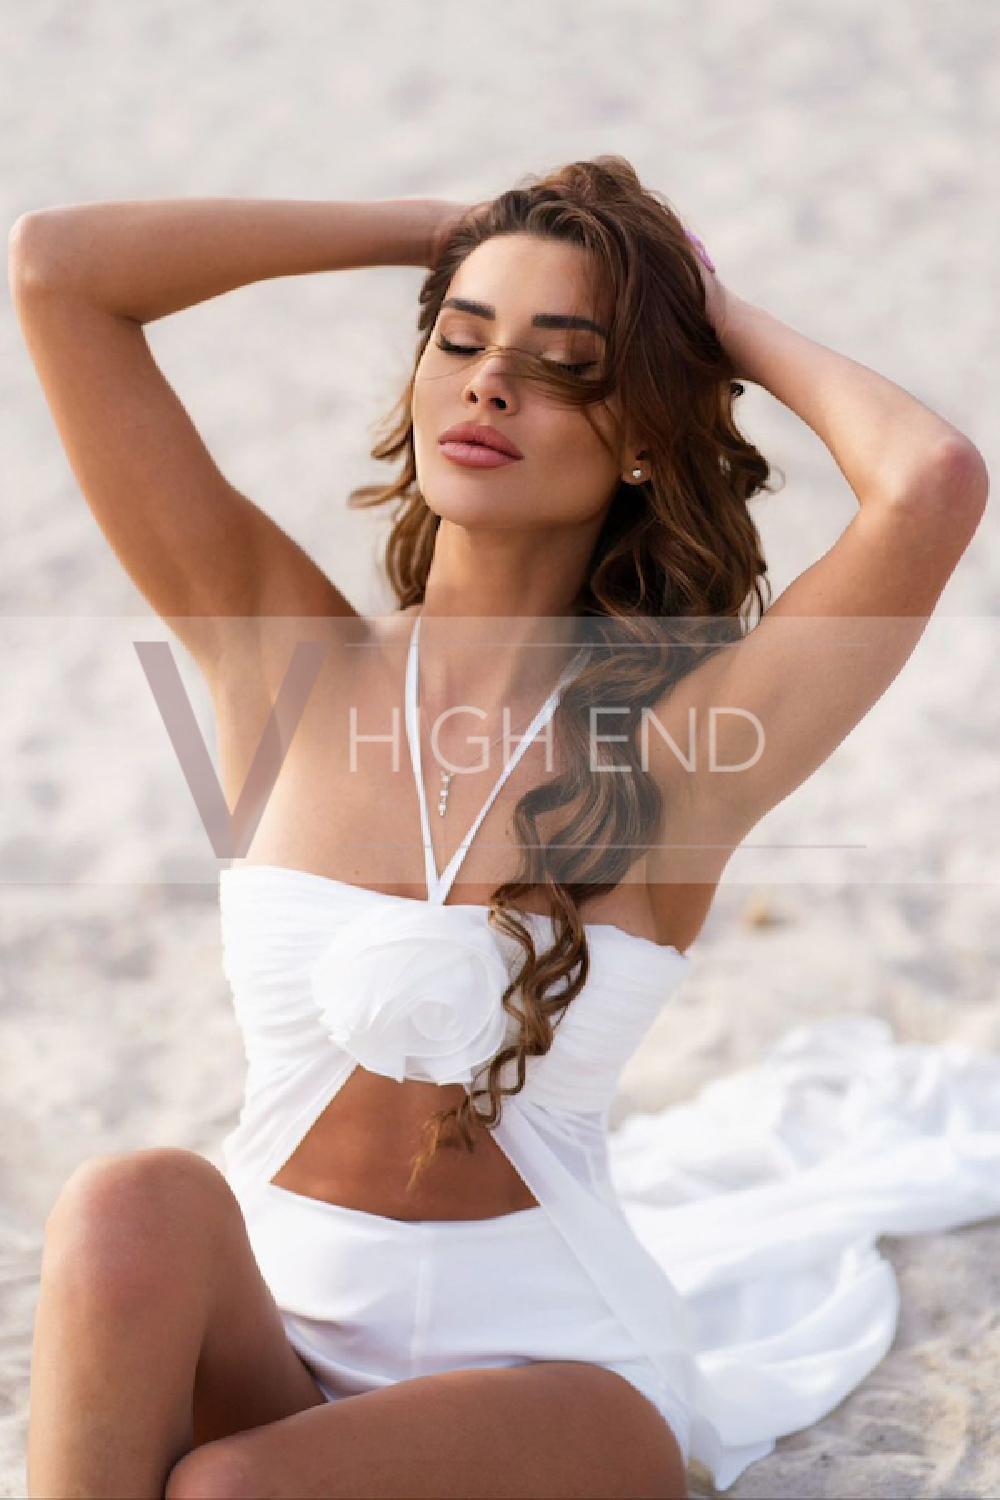 Brunette escort Ilona is posing on the beach in a white attire with her eyes close